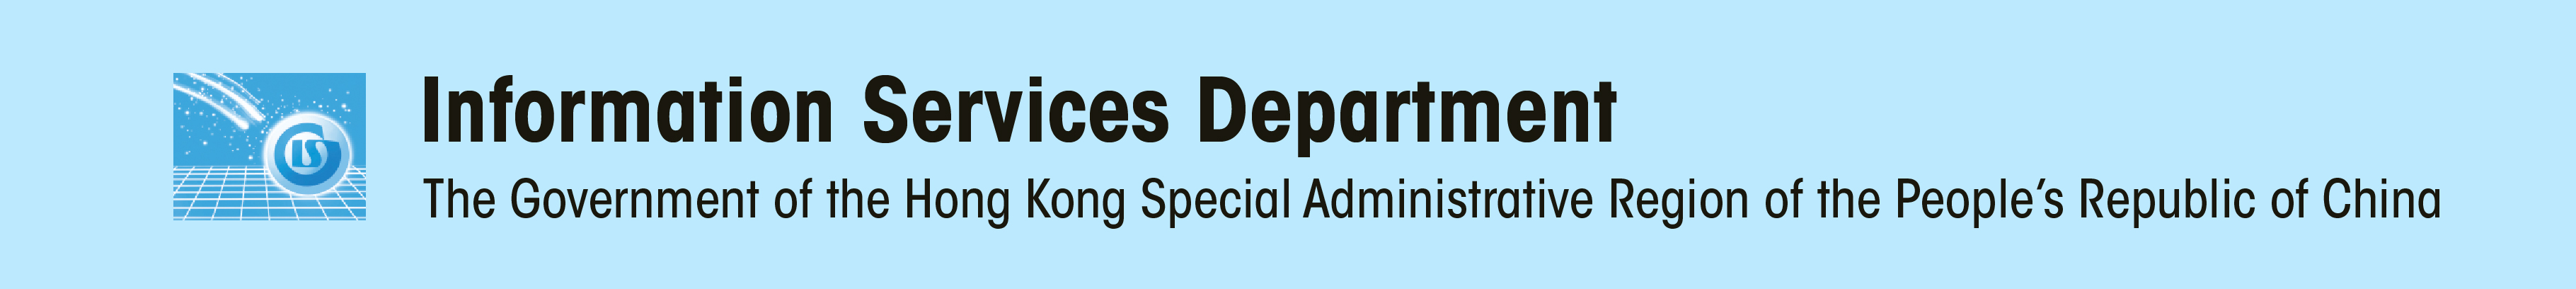 Information Services Department